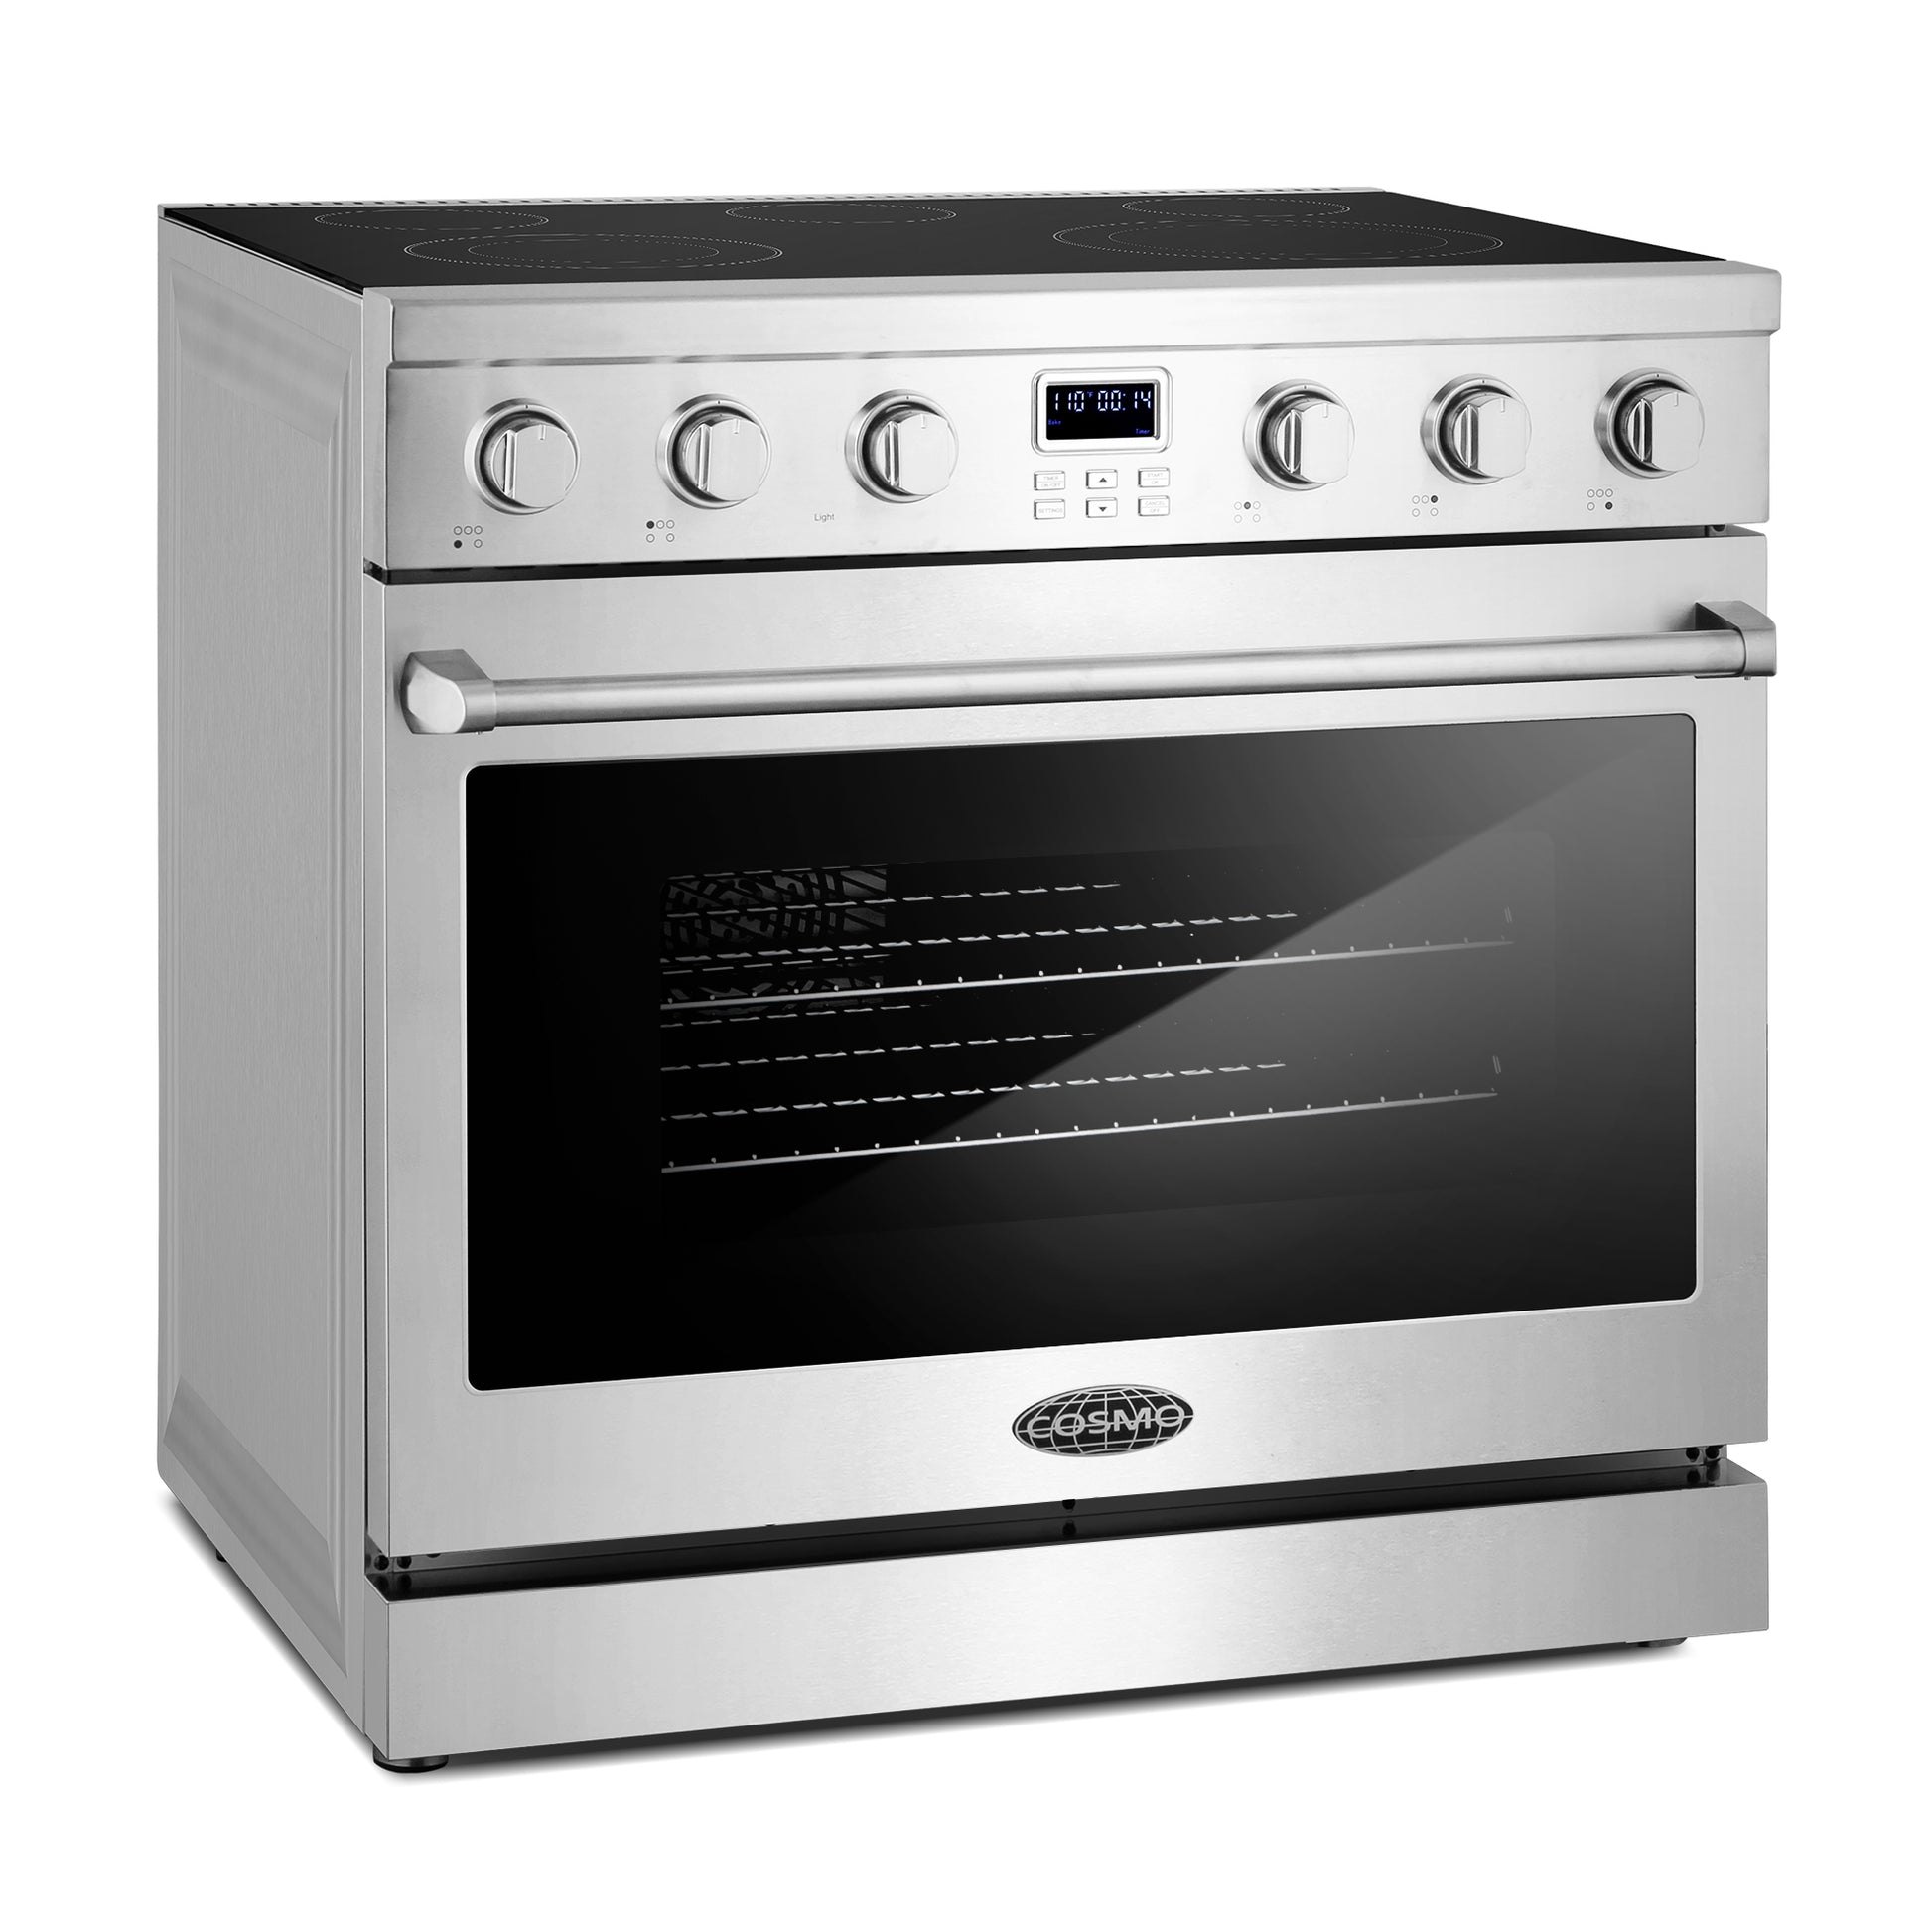 Cosmo Commercial Style 36 in. 6.0 cu. ft. Electric Range  in Stainless Steel with 5 Burner Glass Cooktop and Convection Oven